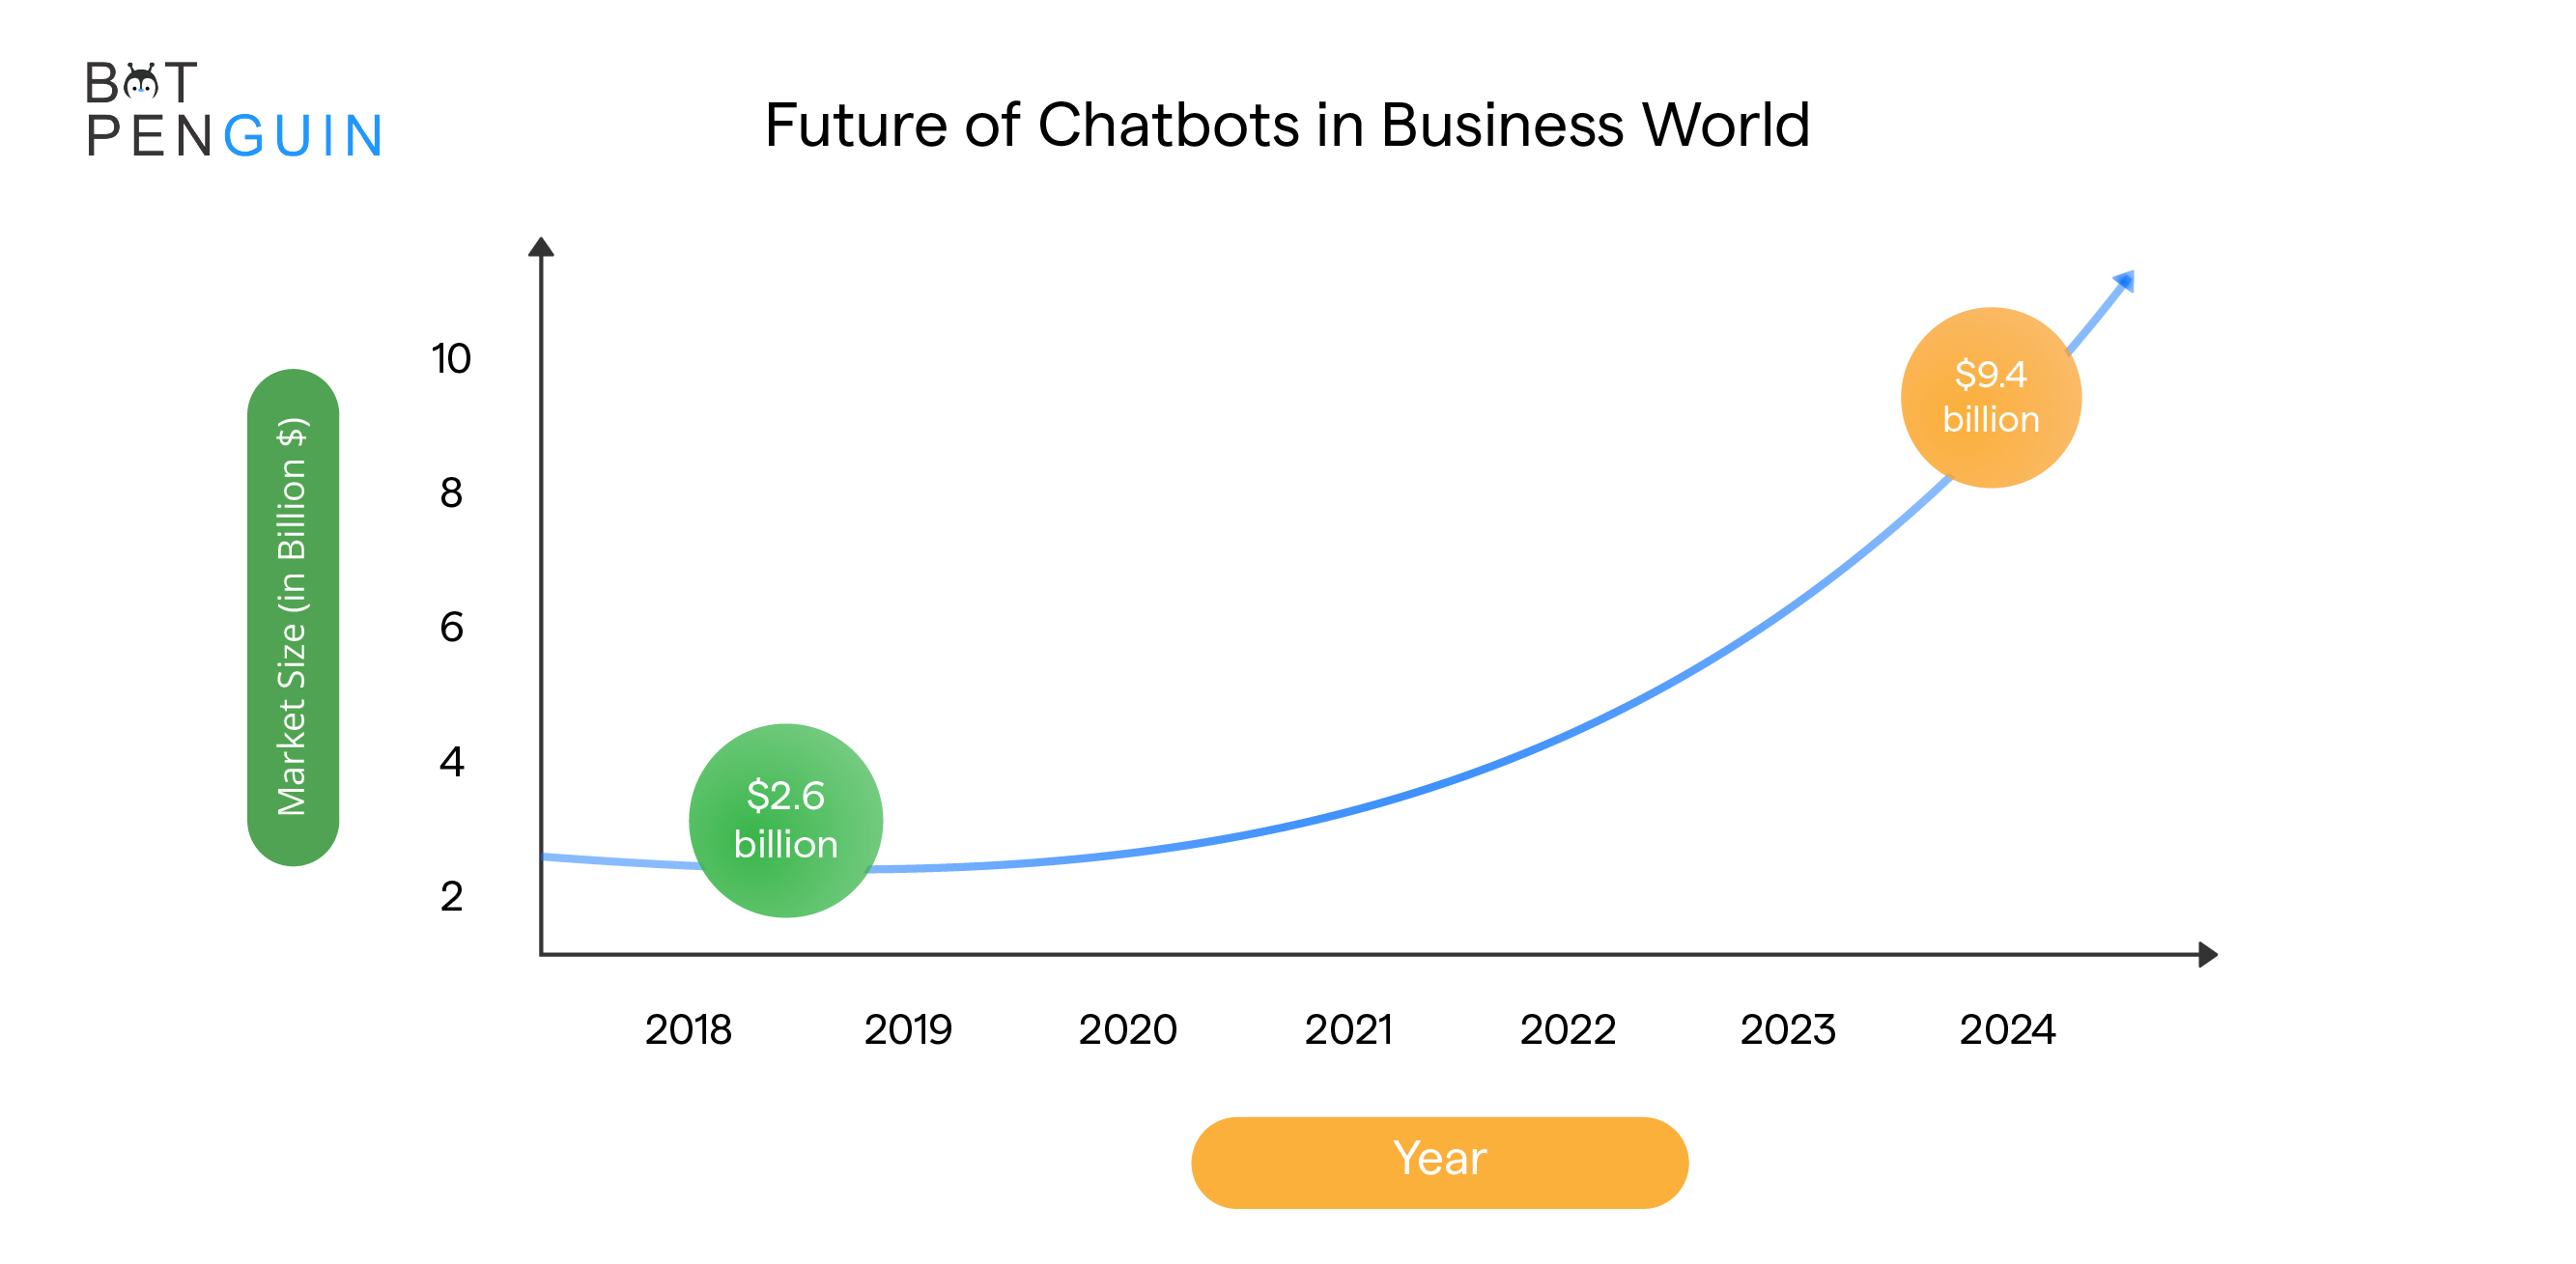 Are Chatbots the future of the business world